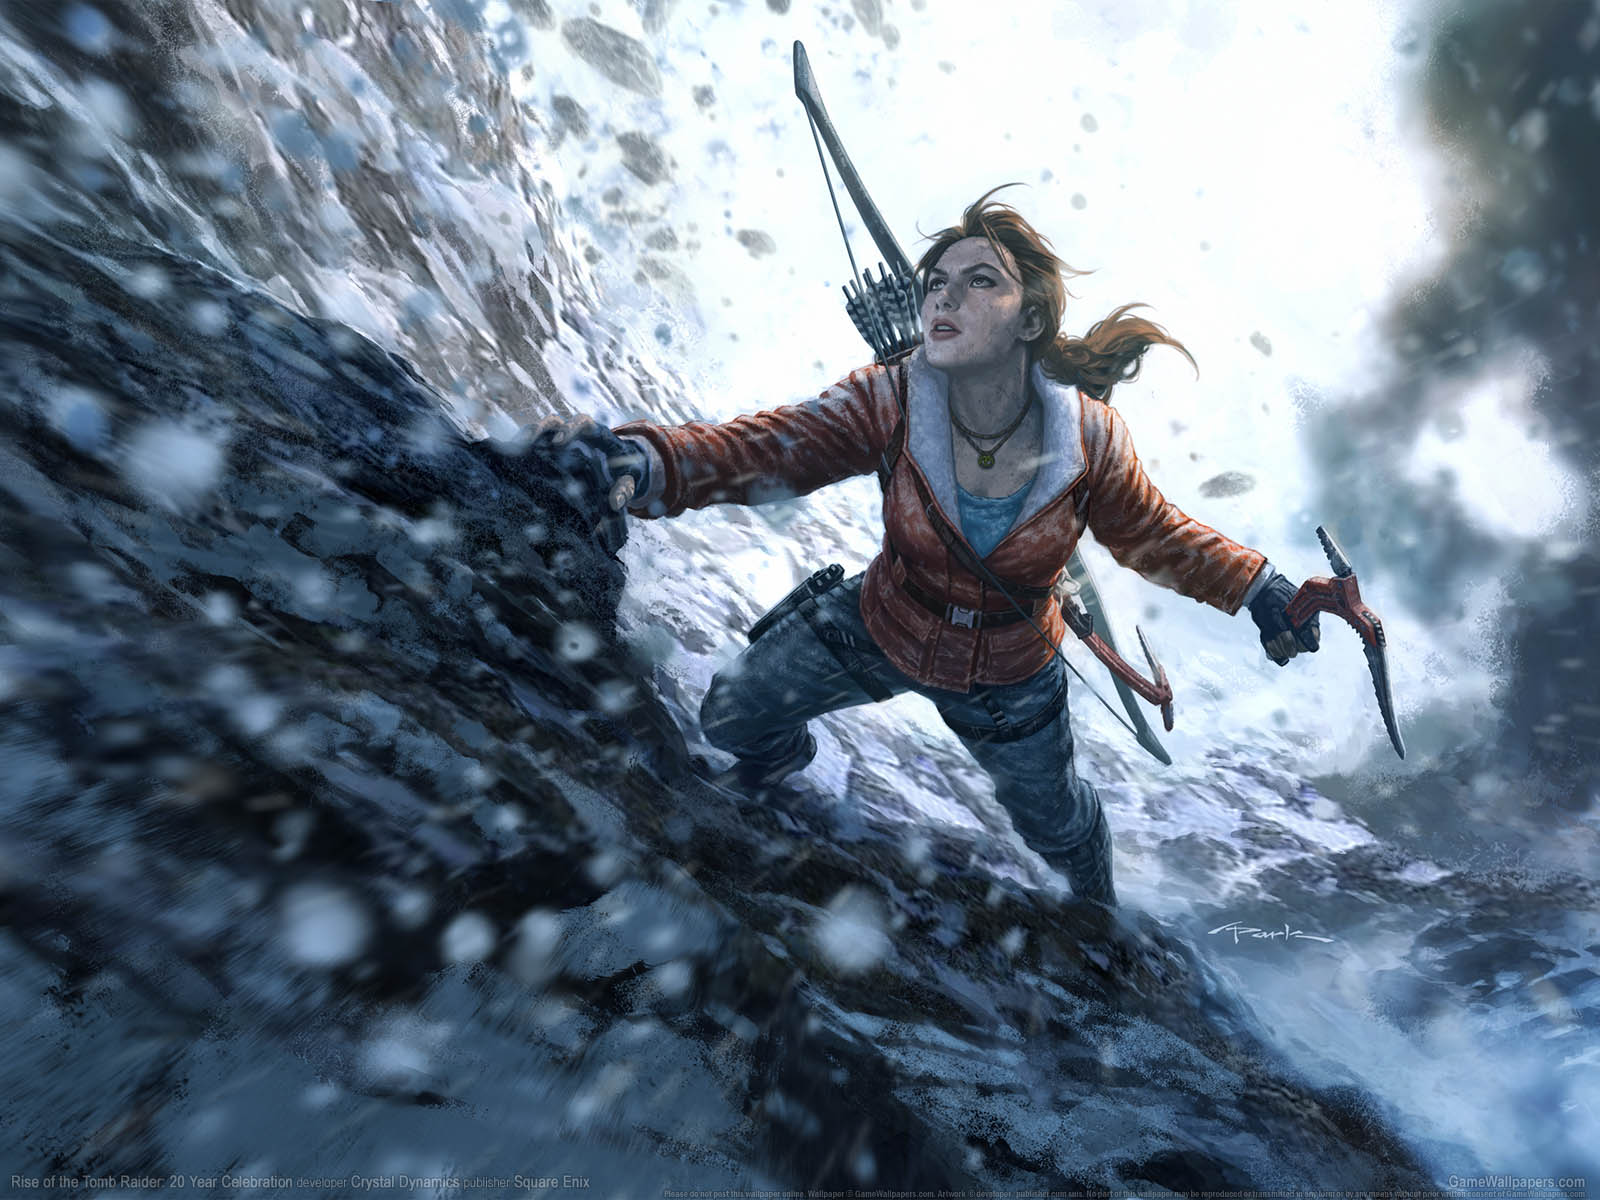 Rise of the Tomb Raider%3A 20 Year Celebration achtergrond 02 1600x1200